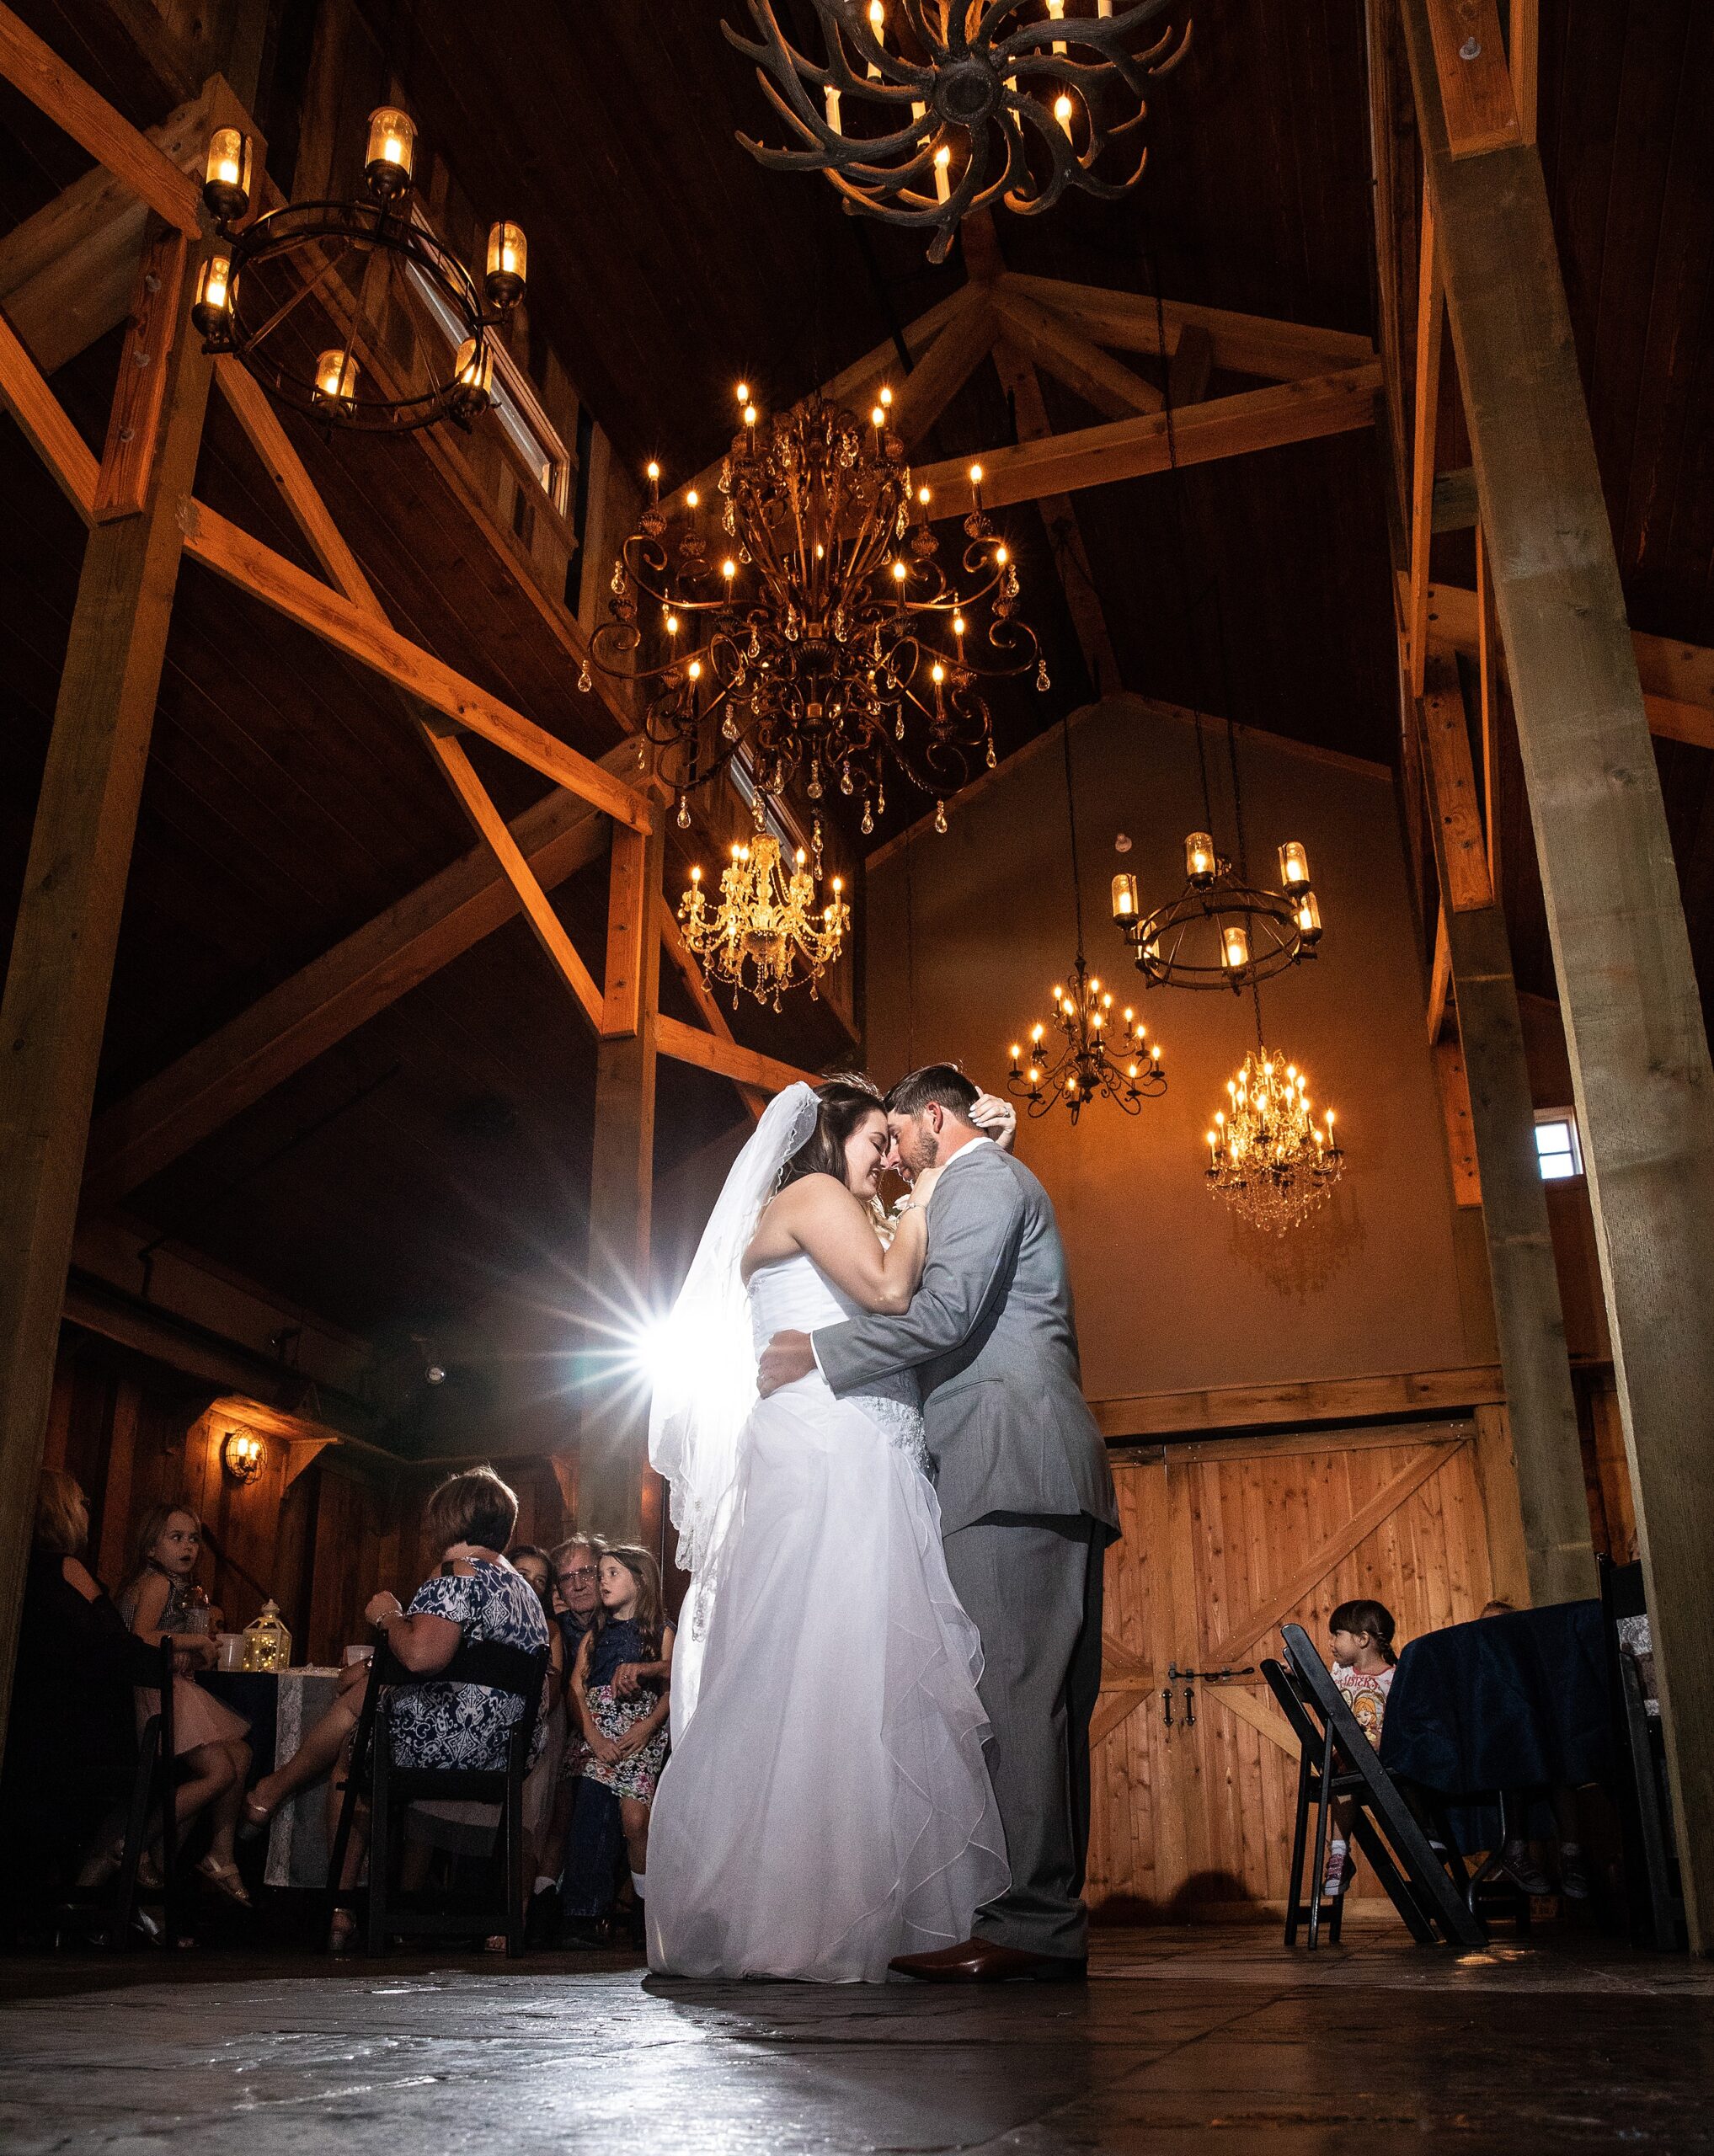 Newlyweds dance holding each other close under chandeliers in a historic grant station wedding